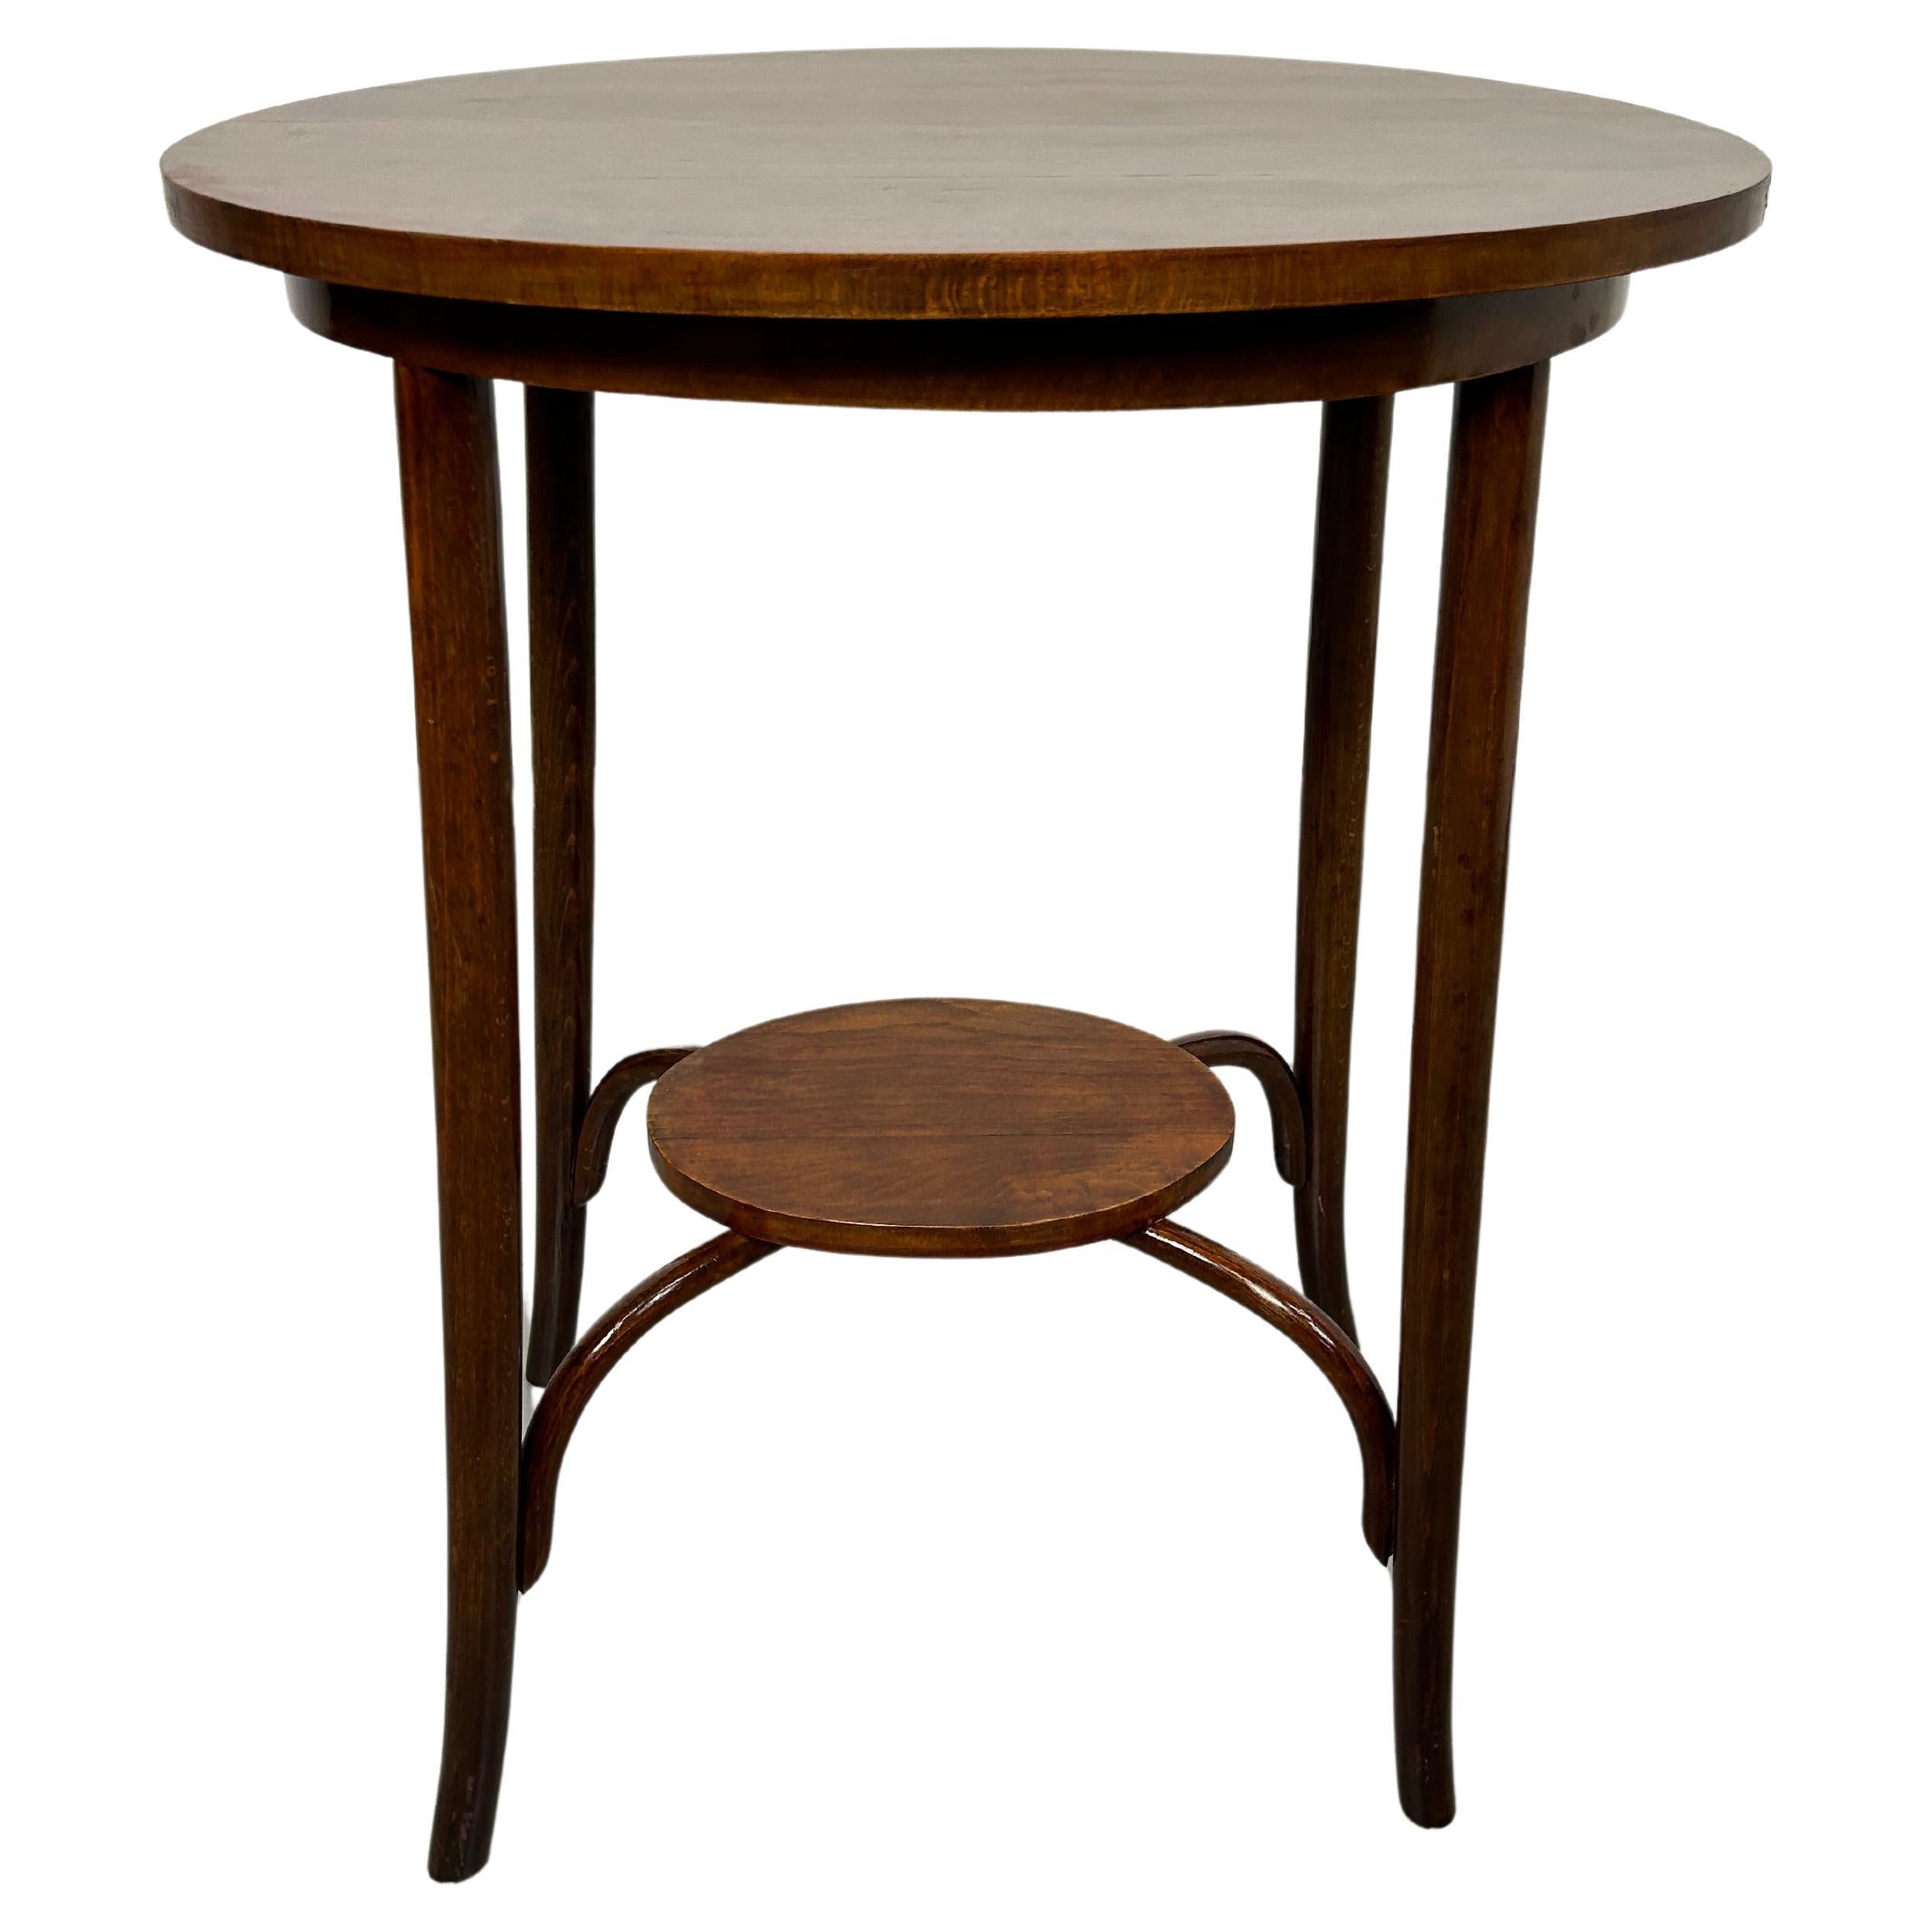 Oval bentwood table by Thonet